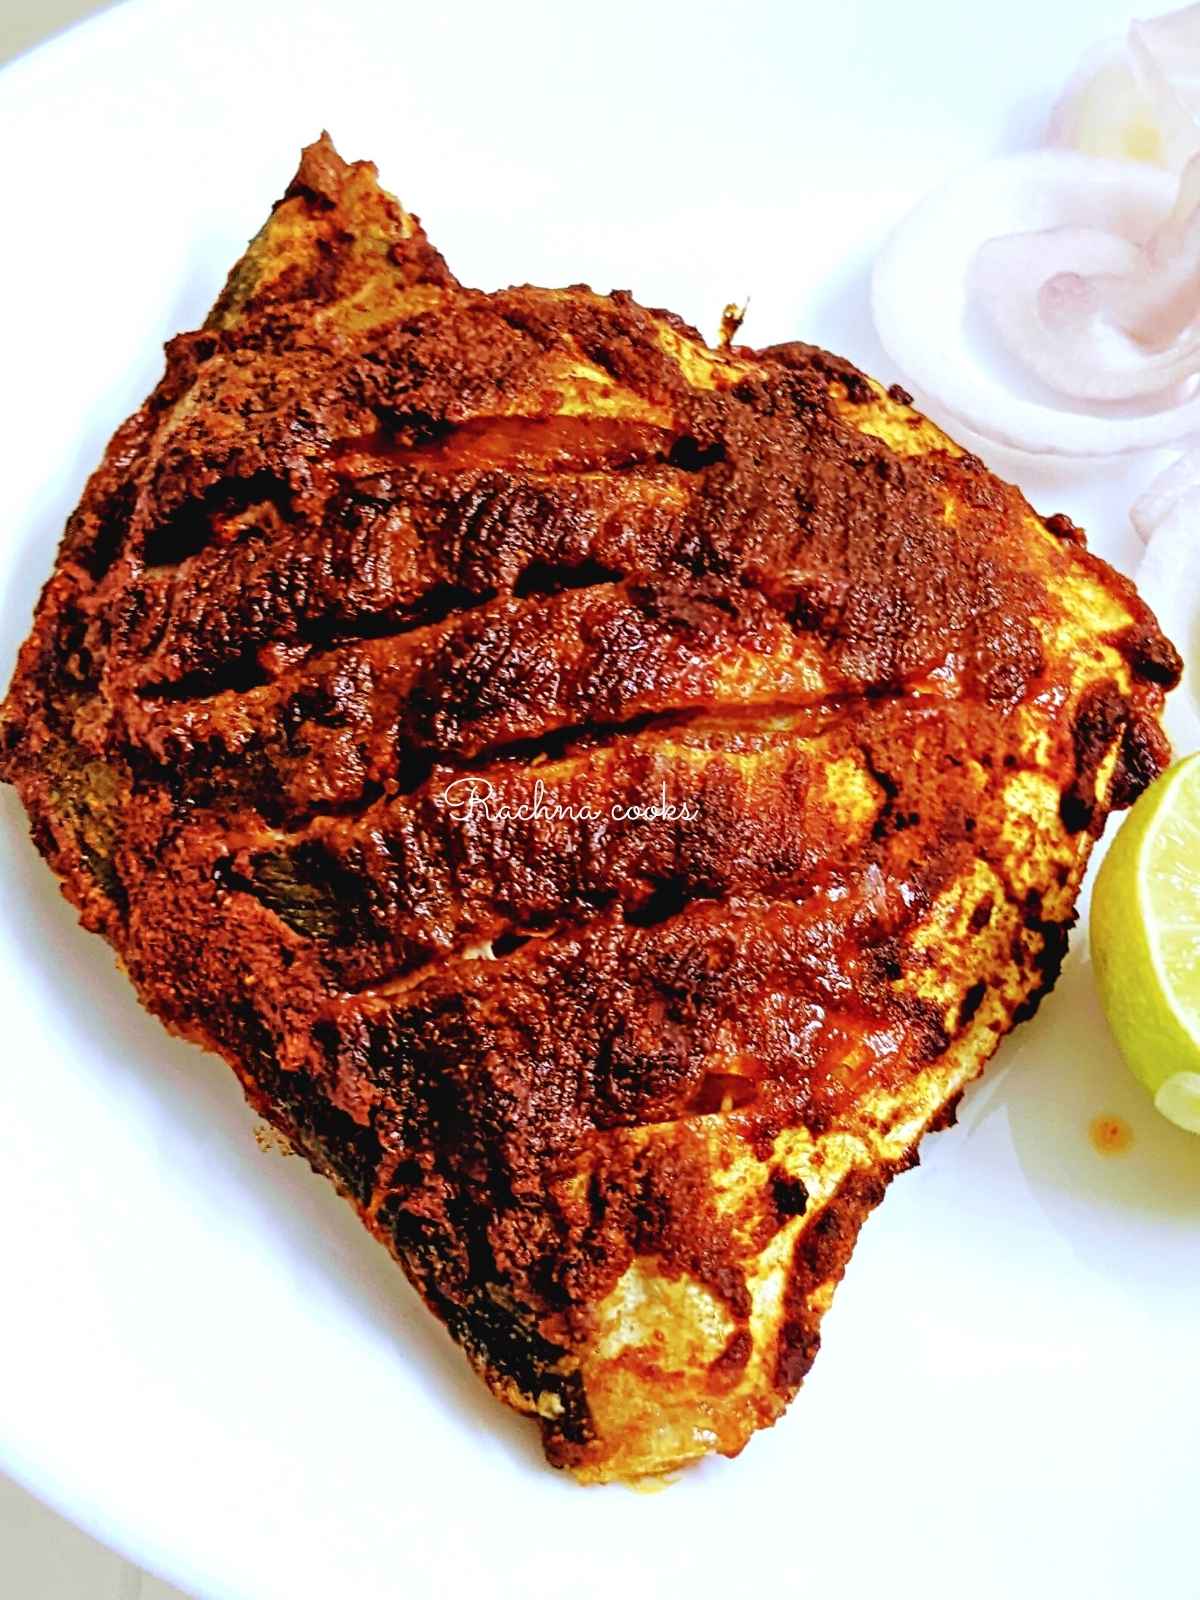 Top shot of Pomfret fry in a red masala served on a white plate with lime and onion slices.